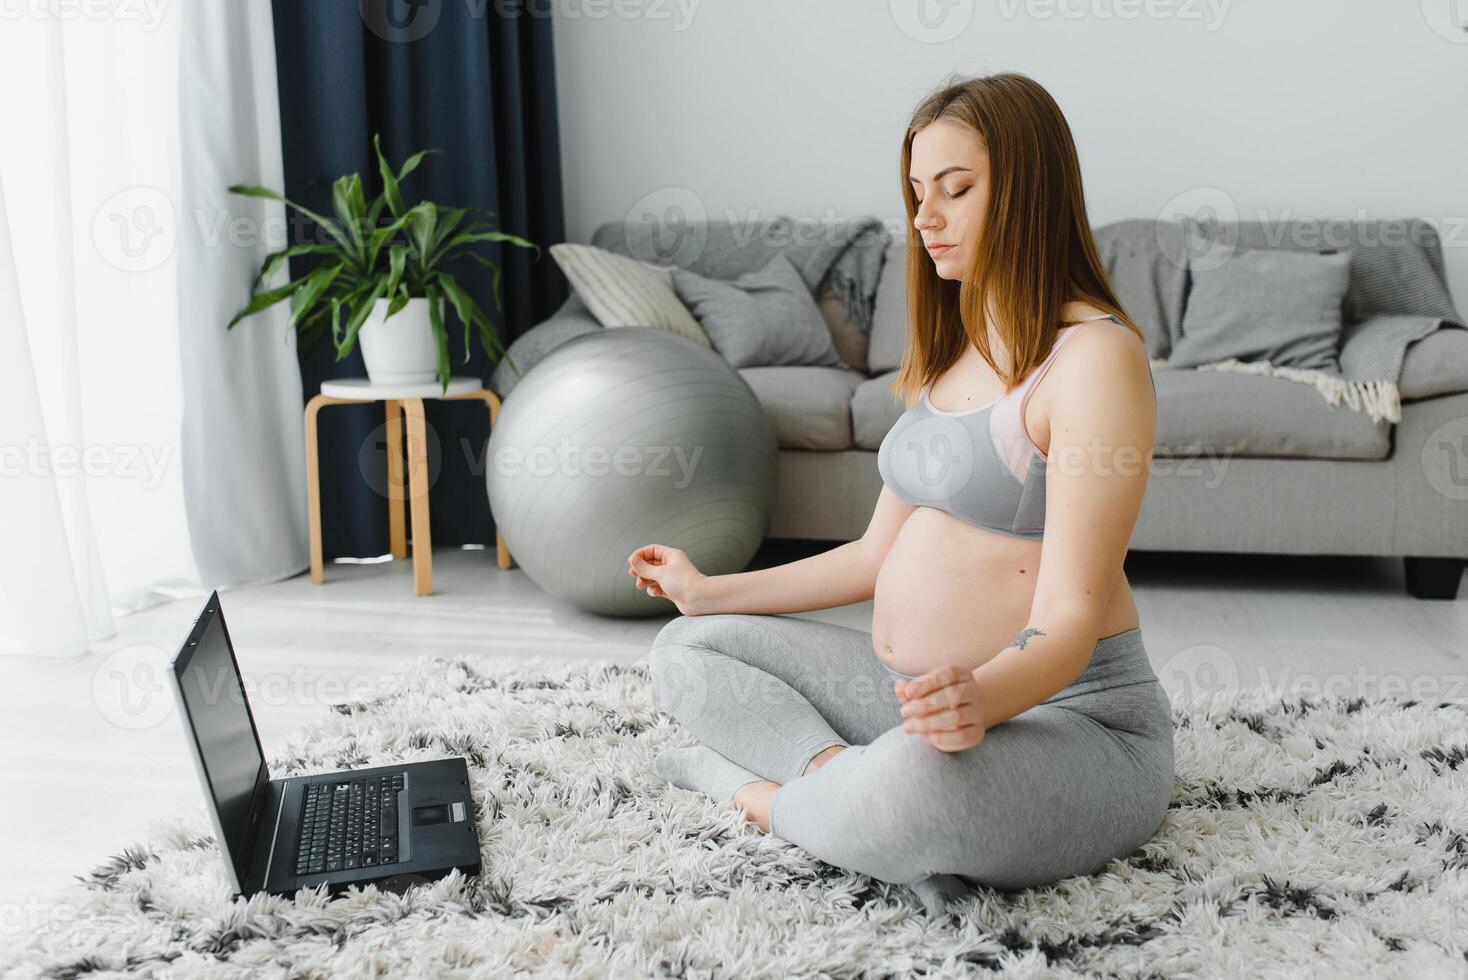 pregnancy, yoga, people and healthy lifestyle concept - happy pregnant woman meditating at home,Vintage style photo